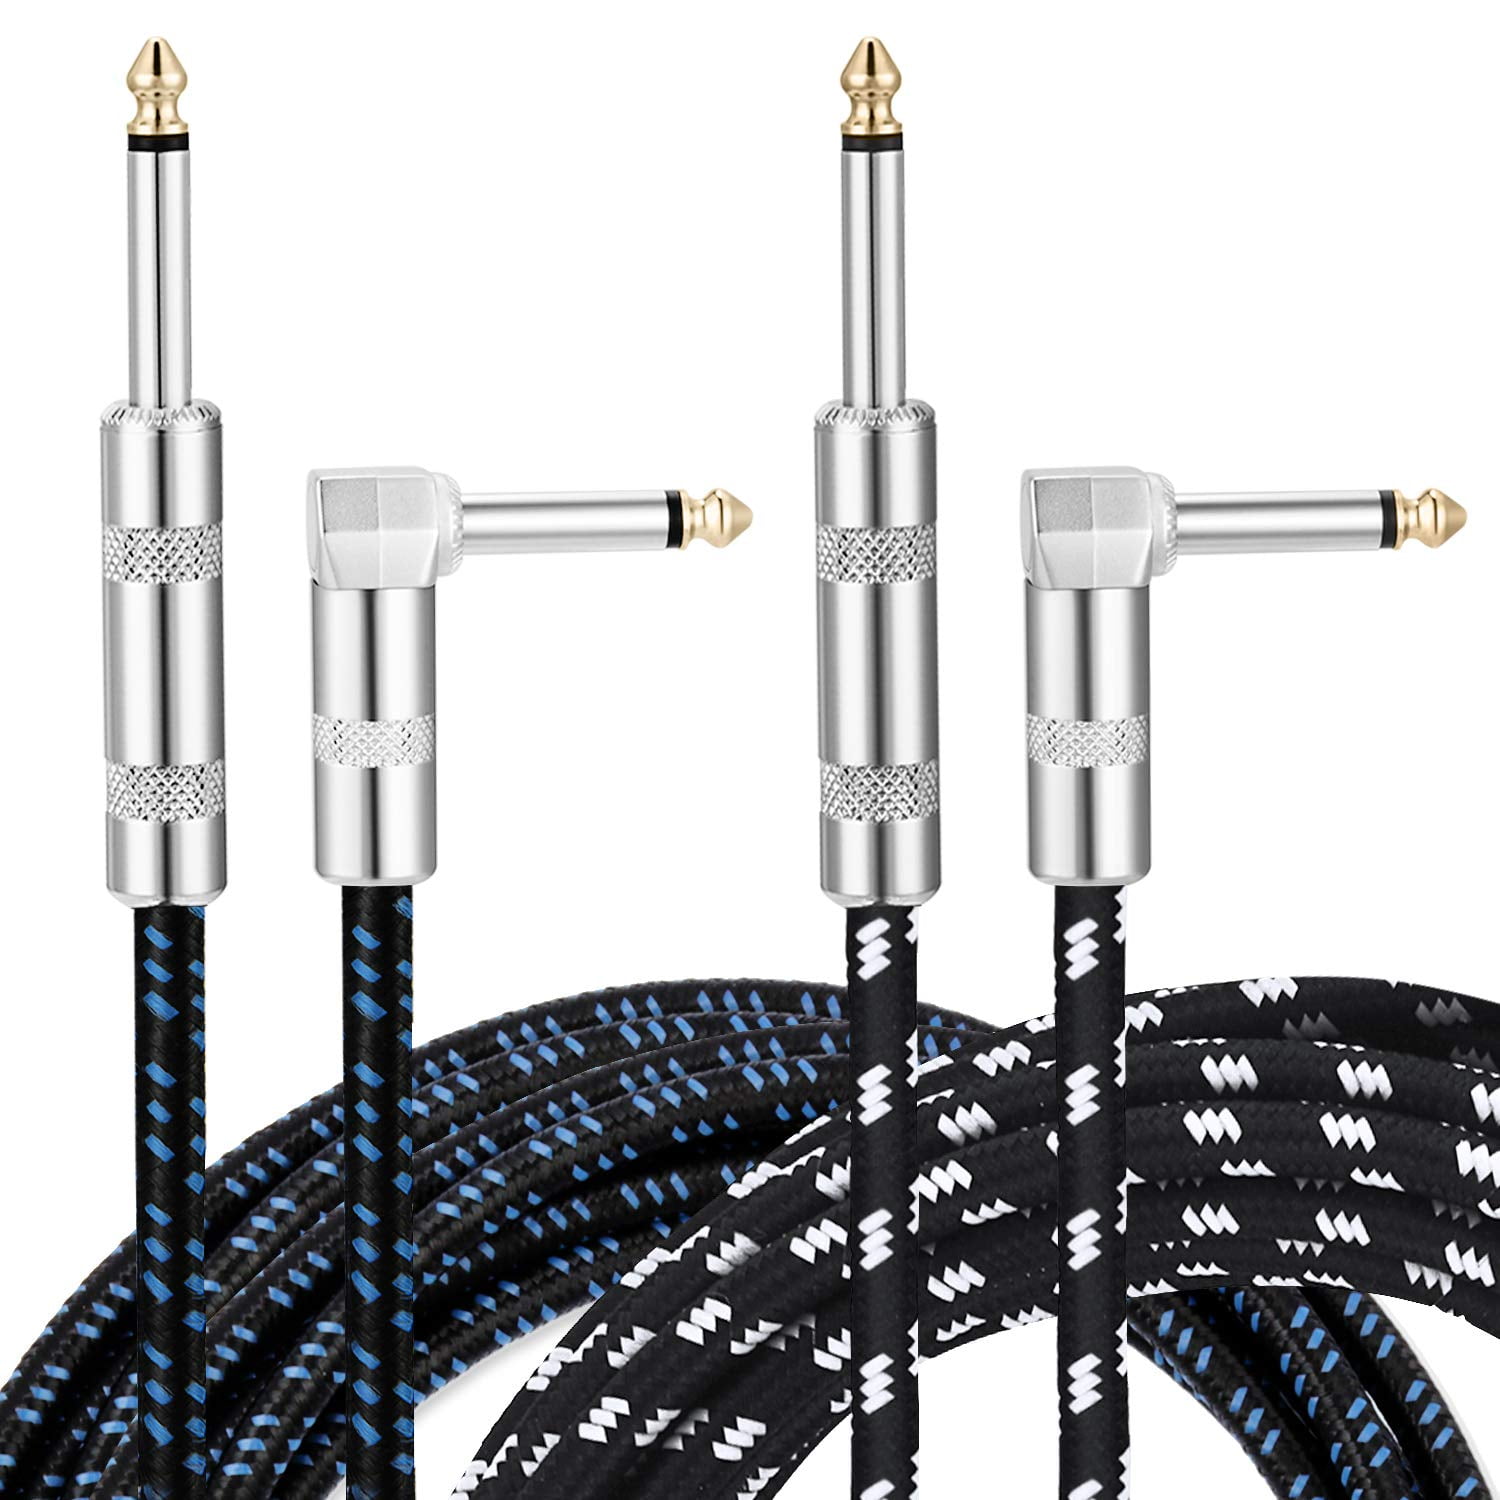 Donner 2 Pack Guitar Cables 10 Feet AMP Cord for Instrument Electric Guitar Bass High Sound Quality Braided Cover 1/4” TS Right Angle to Straight Metal Connectors Black/White and Black/Blue 